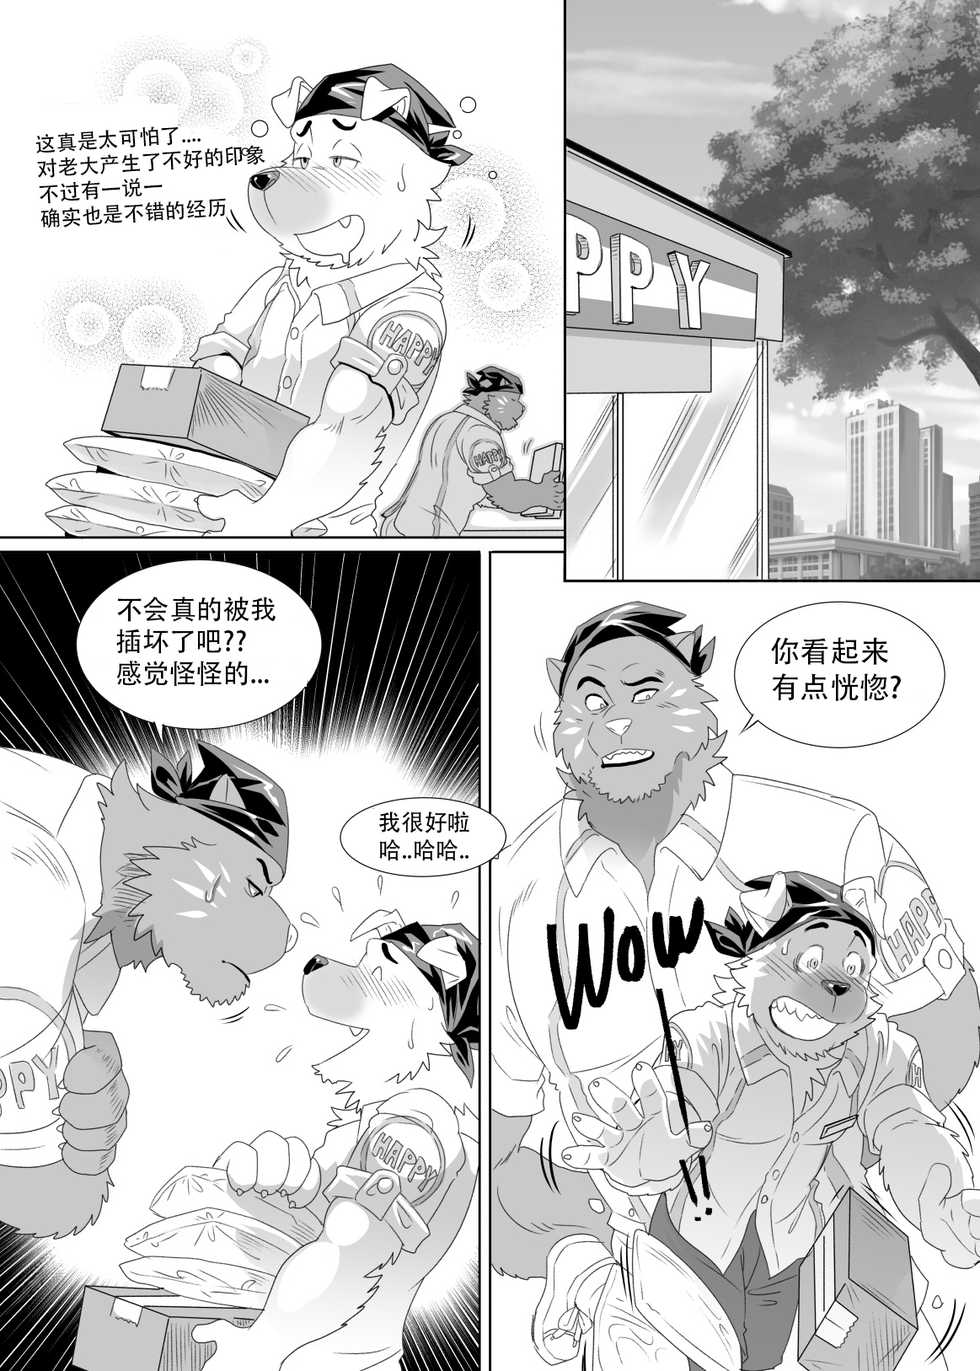 [KUMAHACHI] - "开心"便利店 ["Happy" Convenience Store] [Chinese] - Page 22